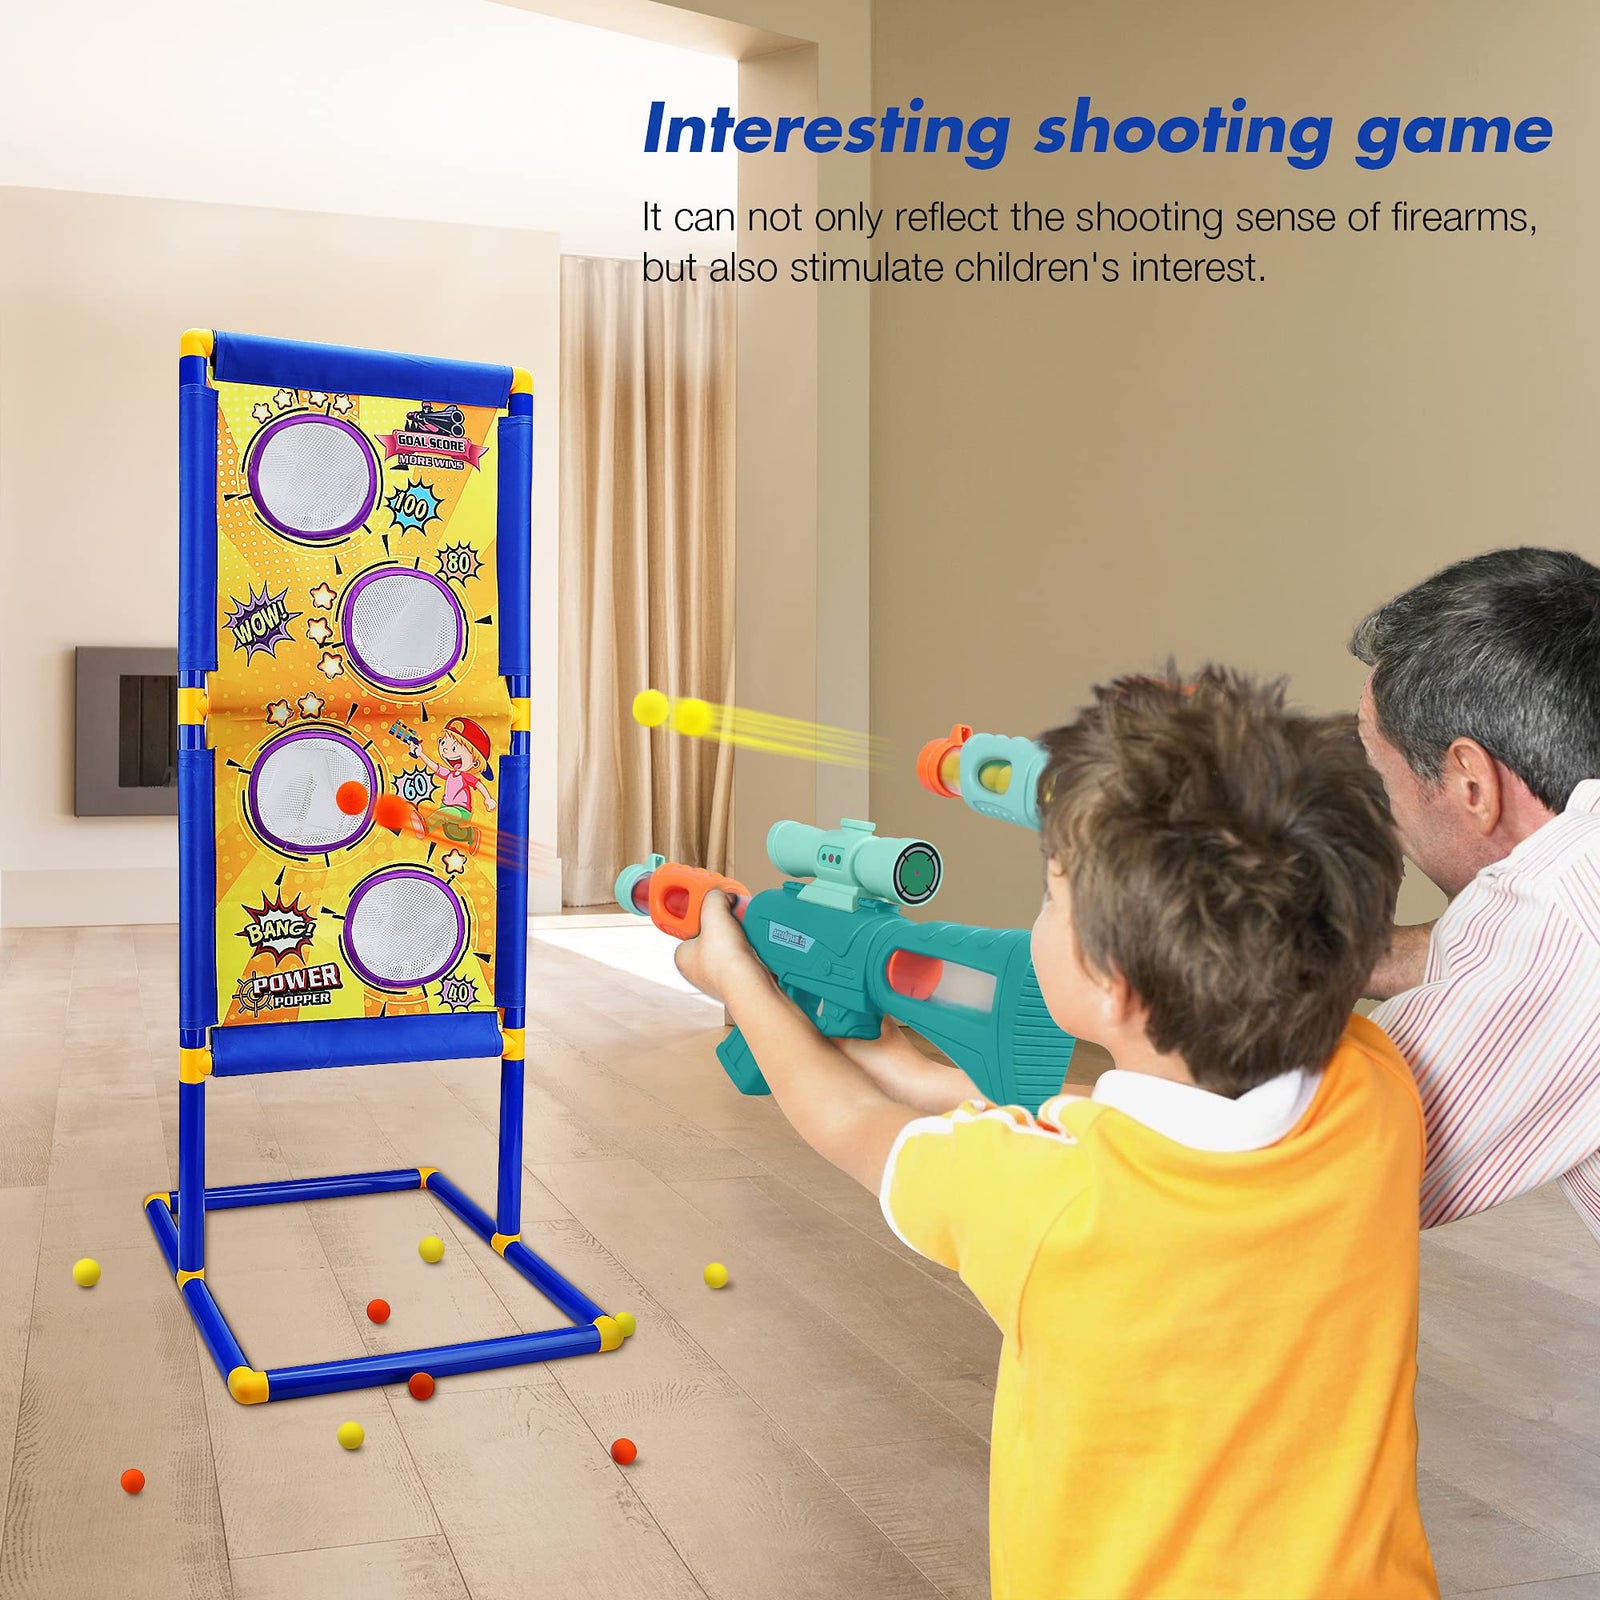 Shooting Game Toy for Boys - 2 Player Toy Foam Blaster Air Guns, 24 Foam Bullet Balls Popper & Standing Shooting Target, Birthday Gifts for Age 3 4 5 6 7 8 9 10-12 Years Old Kids, Girls